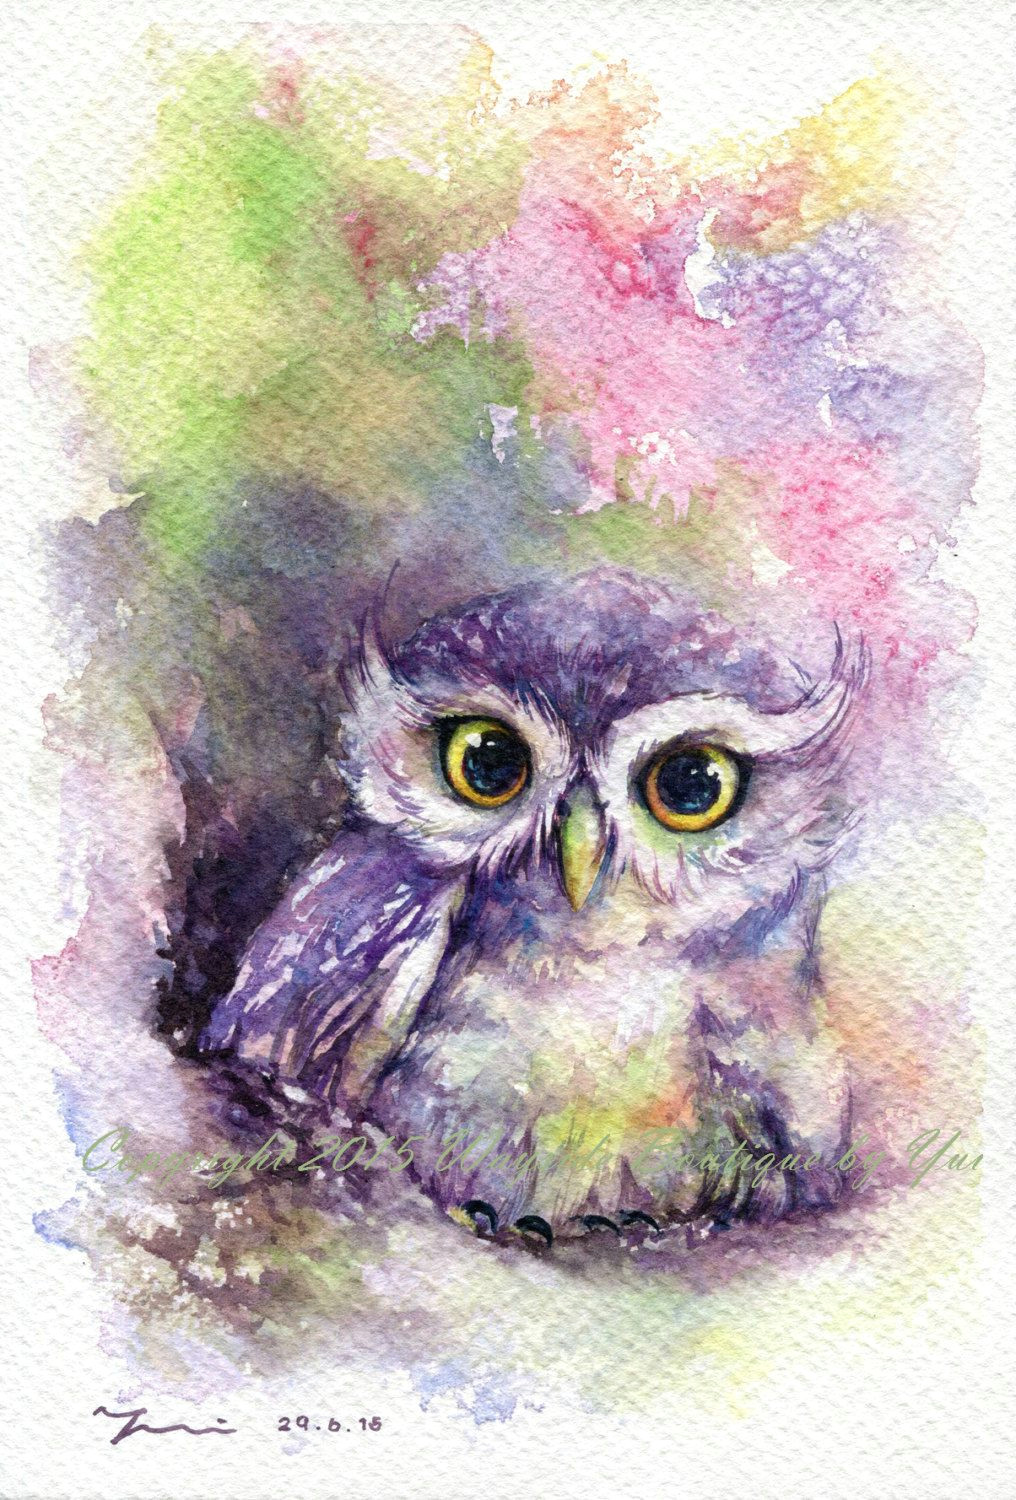 Drawings Of Owl Eyes Rainbow Owl original Watercolor Painting 7 5×11 Inches Owl